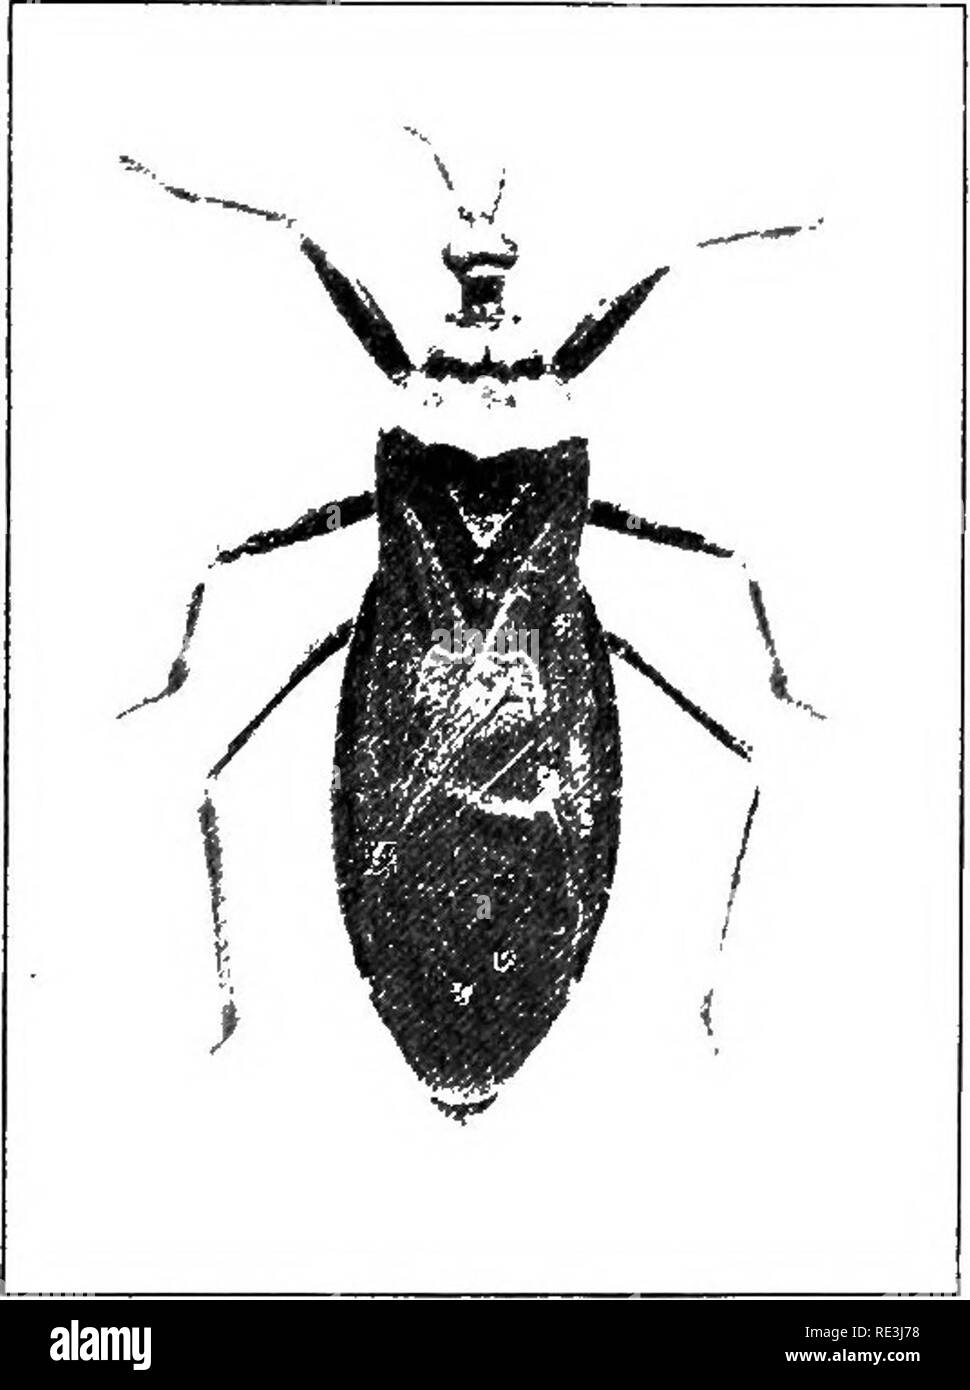 . Handbook of medical entomology. Insect pests; Insects as carriers of disease; Medical parasitology. 20. Reduvius (Opsicoetus) personatus. (x2). cause severe, shooting pains that may extend through- out the arm and that they may be felt for several days. Relief from the pain may be obtained by the use of dilute ammonia, or a menthol ointment. In the not vincommon case of secondary infection the usual treatment for that should be adopted. The Reduviidae, or assassin-bugs are cap- able of inflicting very painful wounds, as most collect- ors of Hemip- tera know to their or flicker, was heard to  Stock Photo